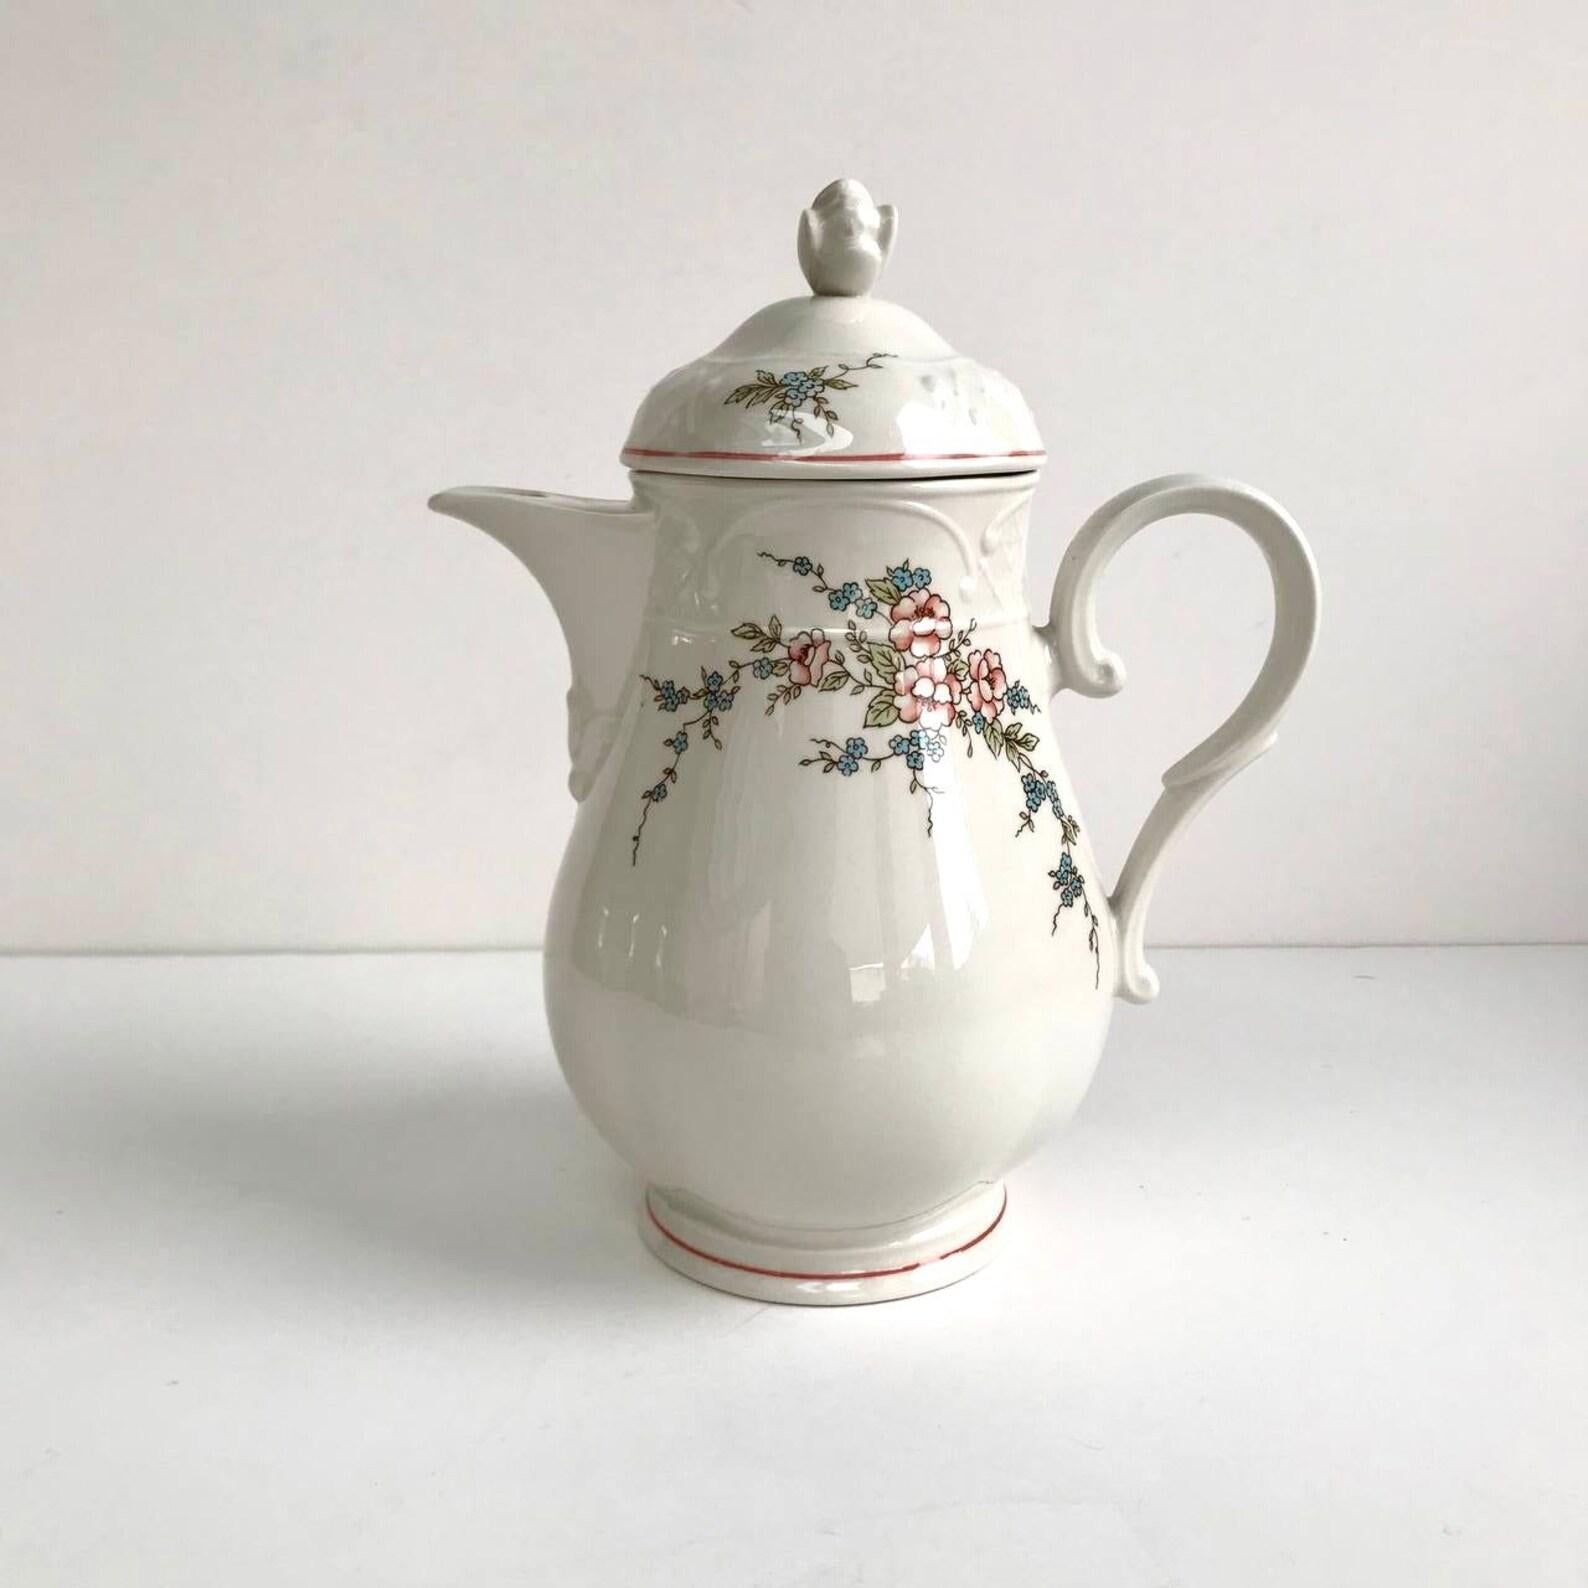 Villeroy and Boch rosette porcelain teapot.

Manufactured in Germany.

This Beautiful Romantic Teapot with Pink and Blue Flowers will Create a Special Atmosphere Coloring Long Evenings in the Family